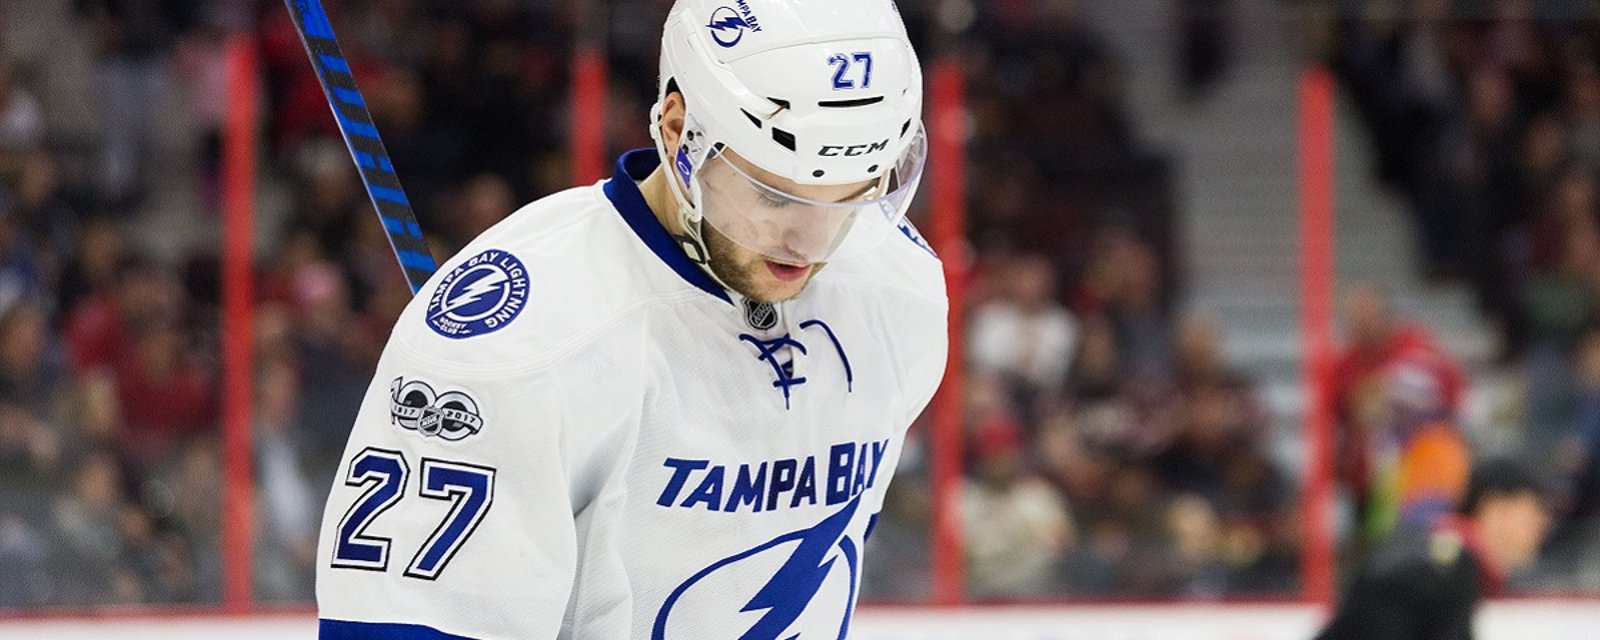 Breaking: Signs of a major change coming for Habs forward Joanthan Drouin.